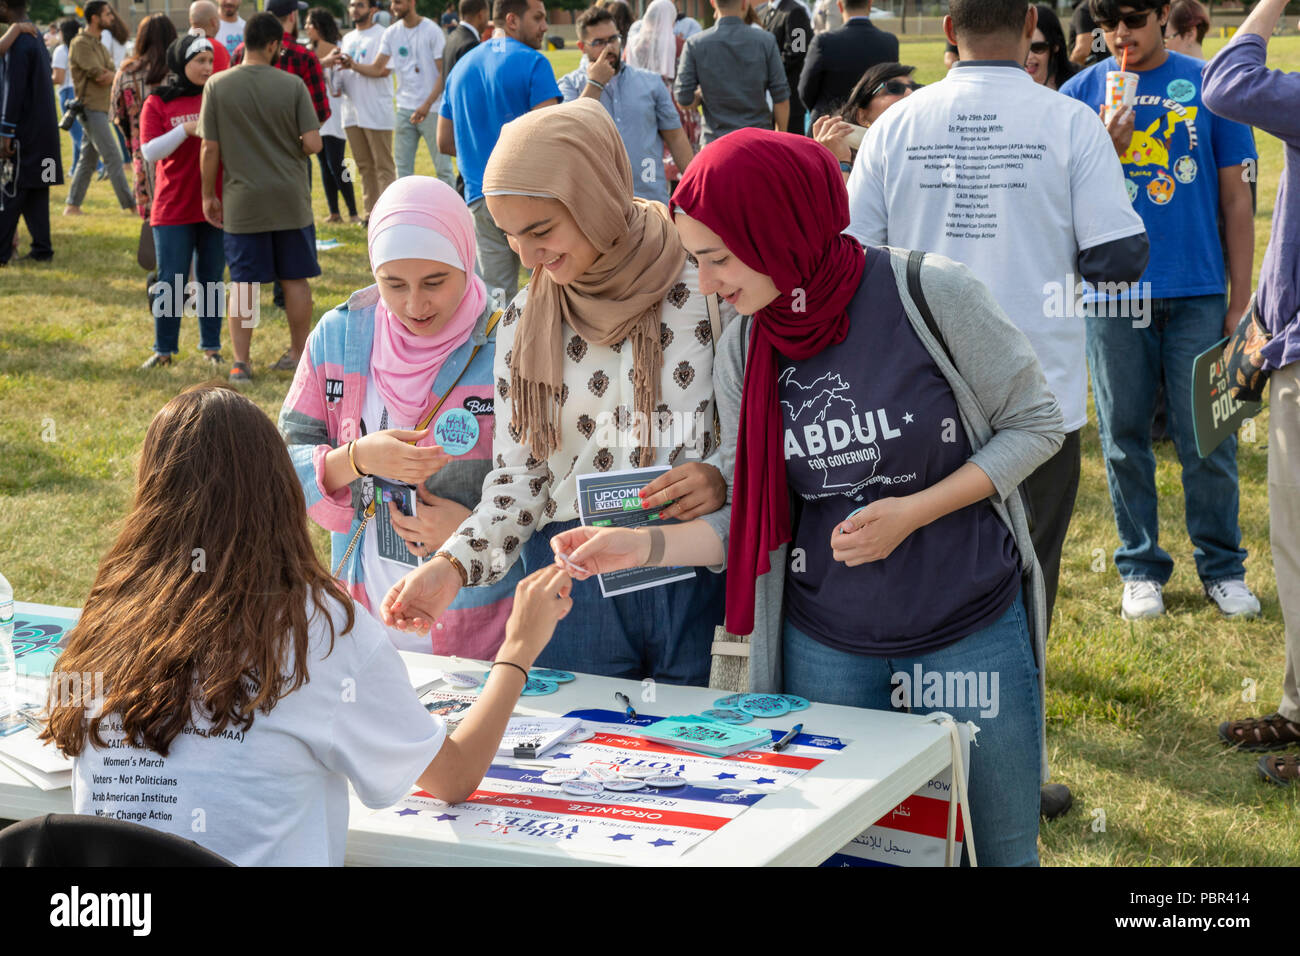 Dearborn, Michigan USA - 29 July 2018 - Women pick up literature at a Muslim Get Out the Vote rally, sponsored by several Muslim community organizations. The rally featured entertainment and speeches from Muslim and other progressive political candidates. Credit: Jim West/Alamy Live News Stock Photo